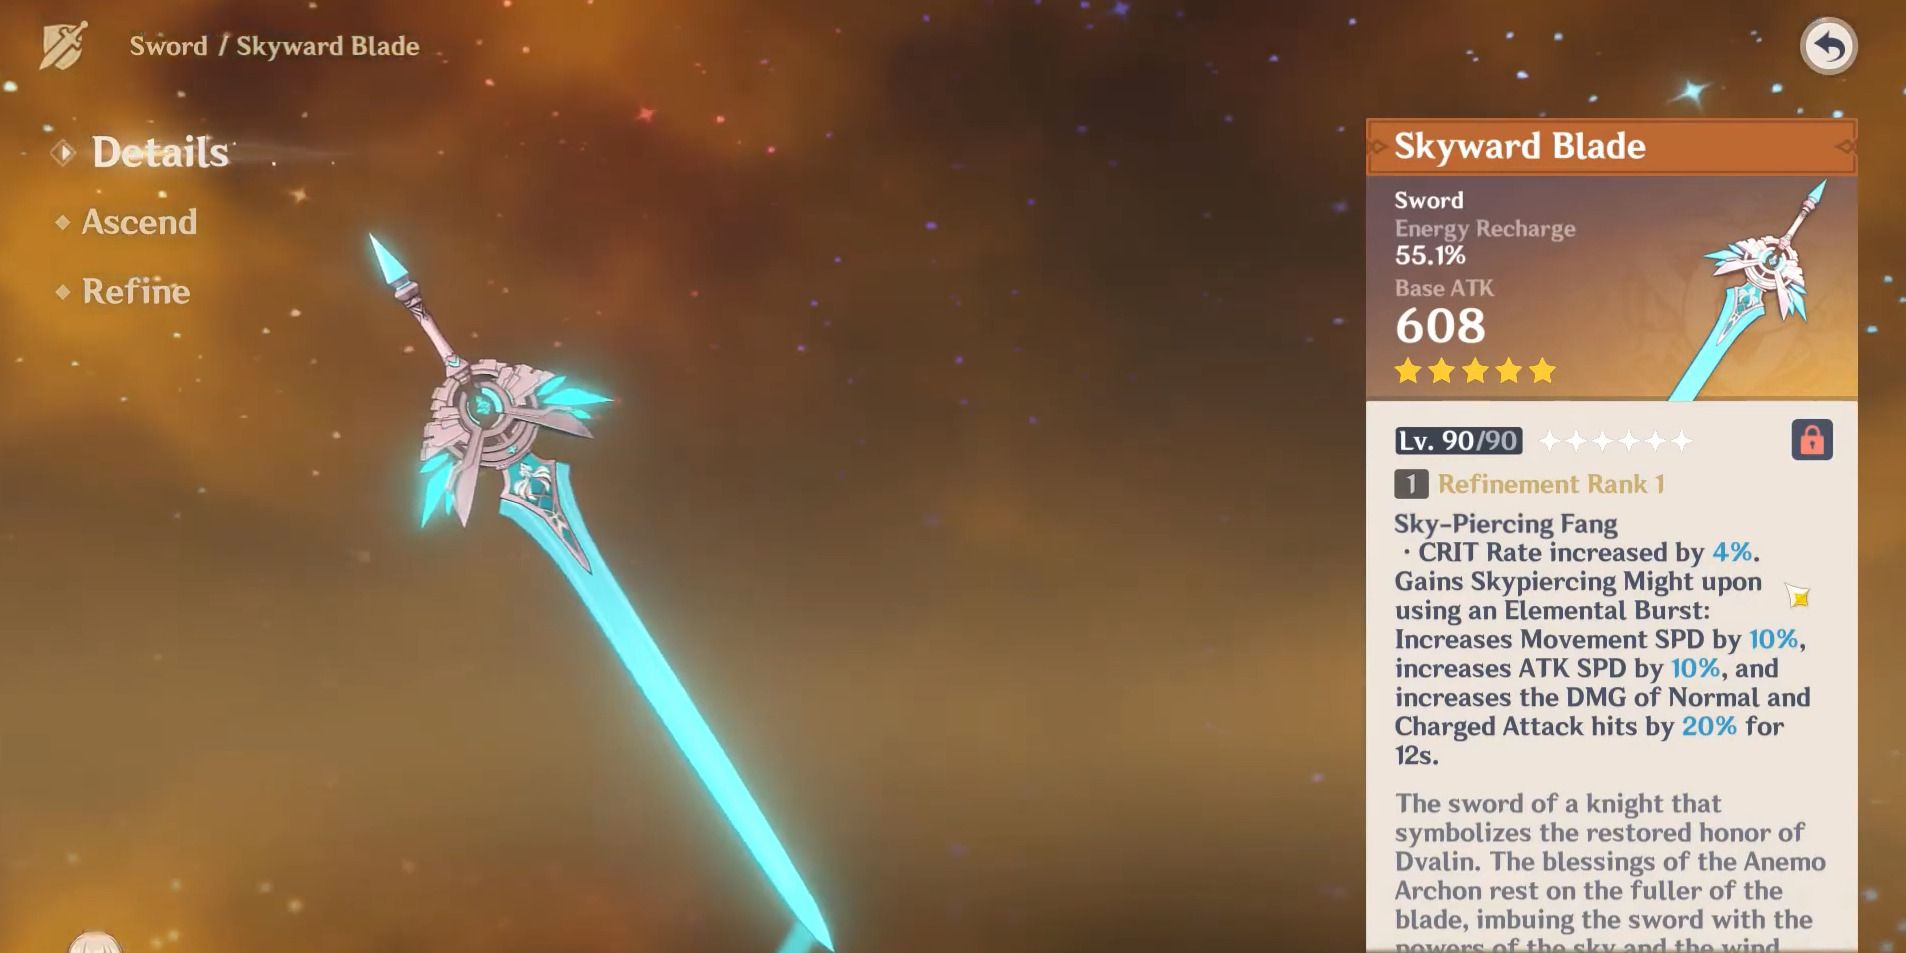 An image of the Skyward Blade weapon and its stats in Genshin Impact.